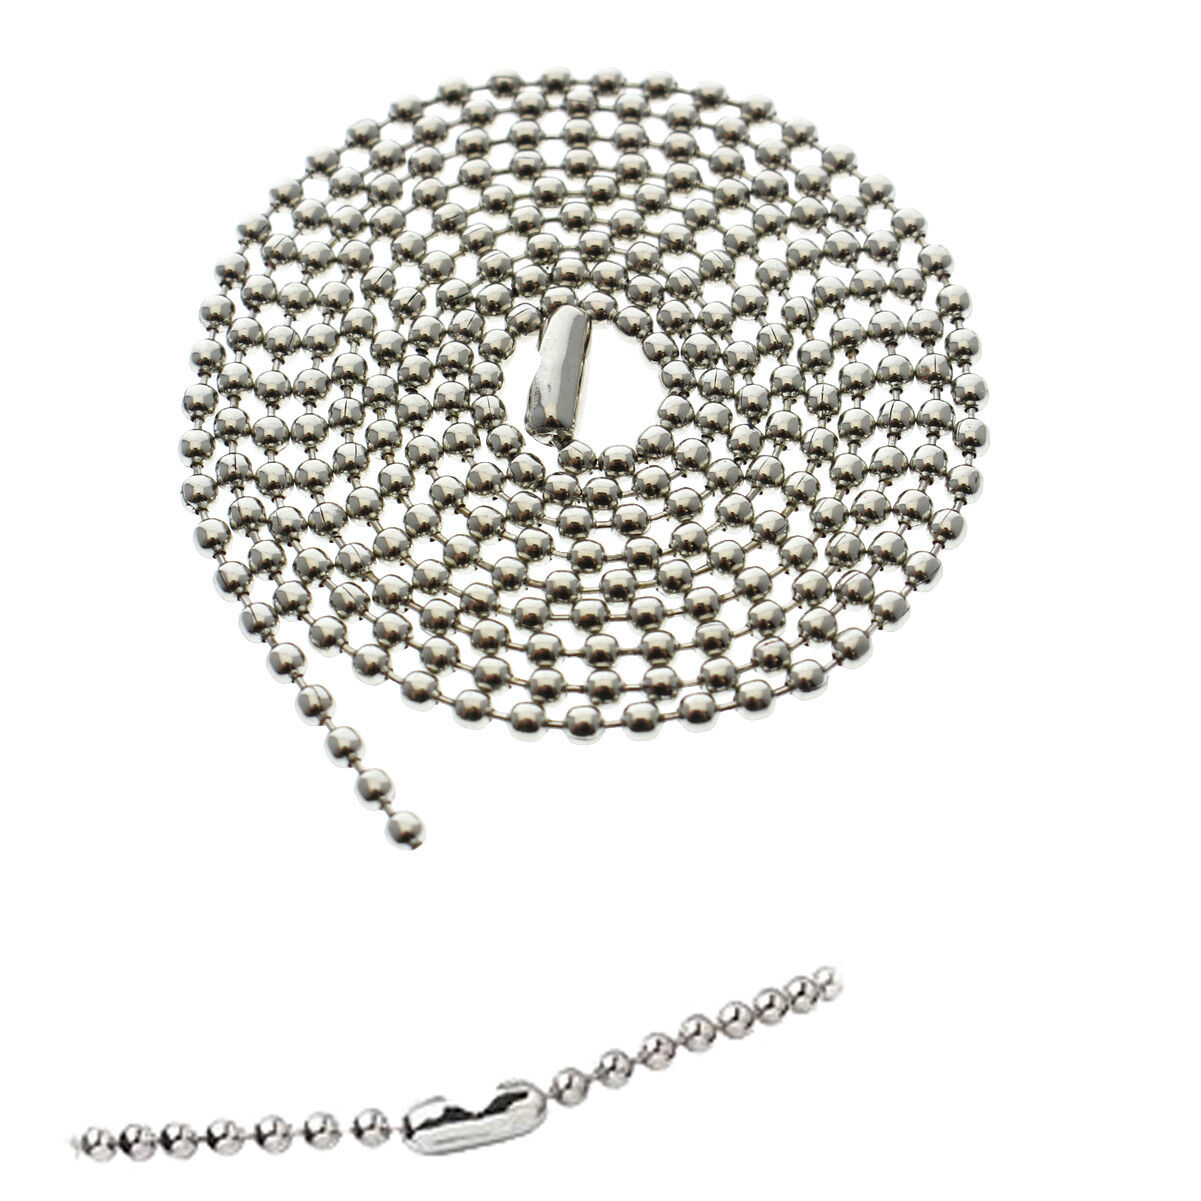 2 Nickel Plated Ball Bead Neck Chains - ID Badge Holder Lanyard Necklace 36"Long Specialist ID SPID-9780